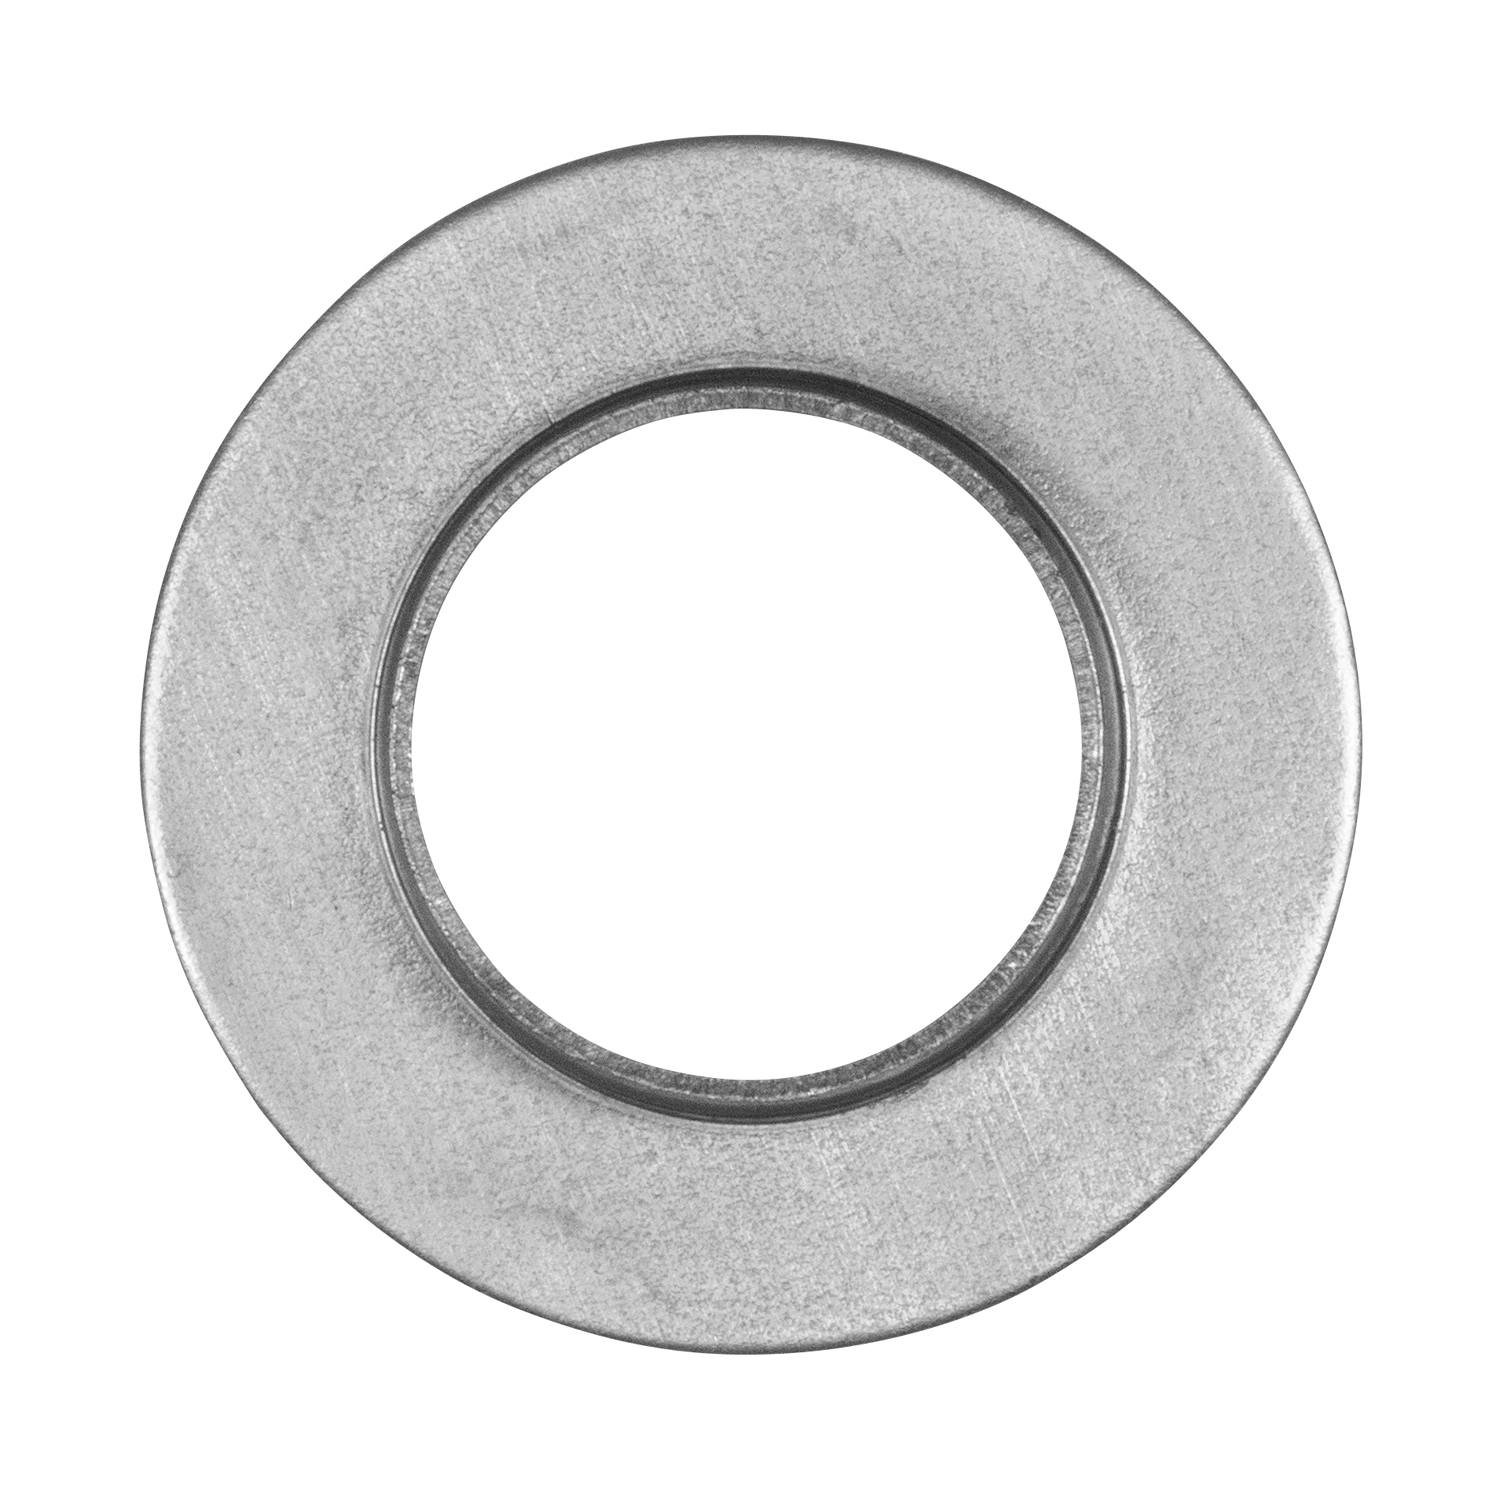 Replacement upper king-pin bushing spring retainer plate for Dana 60